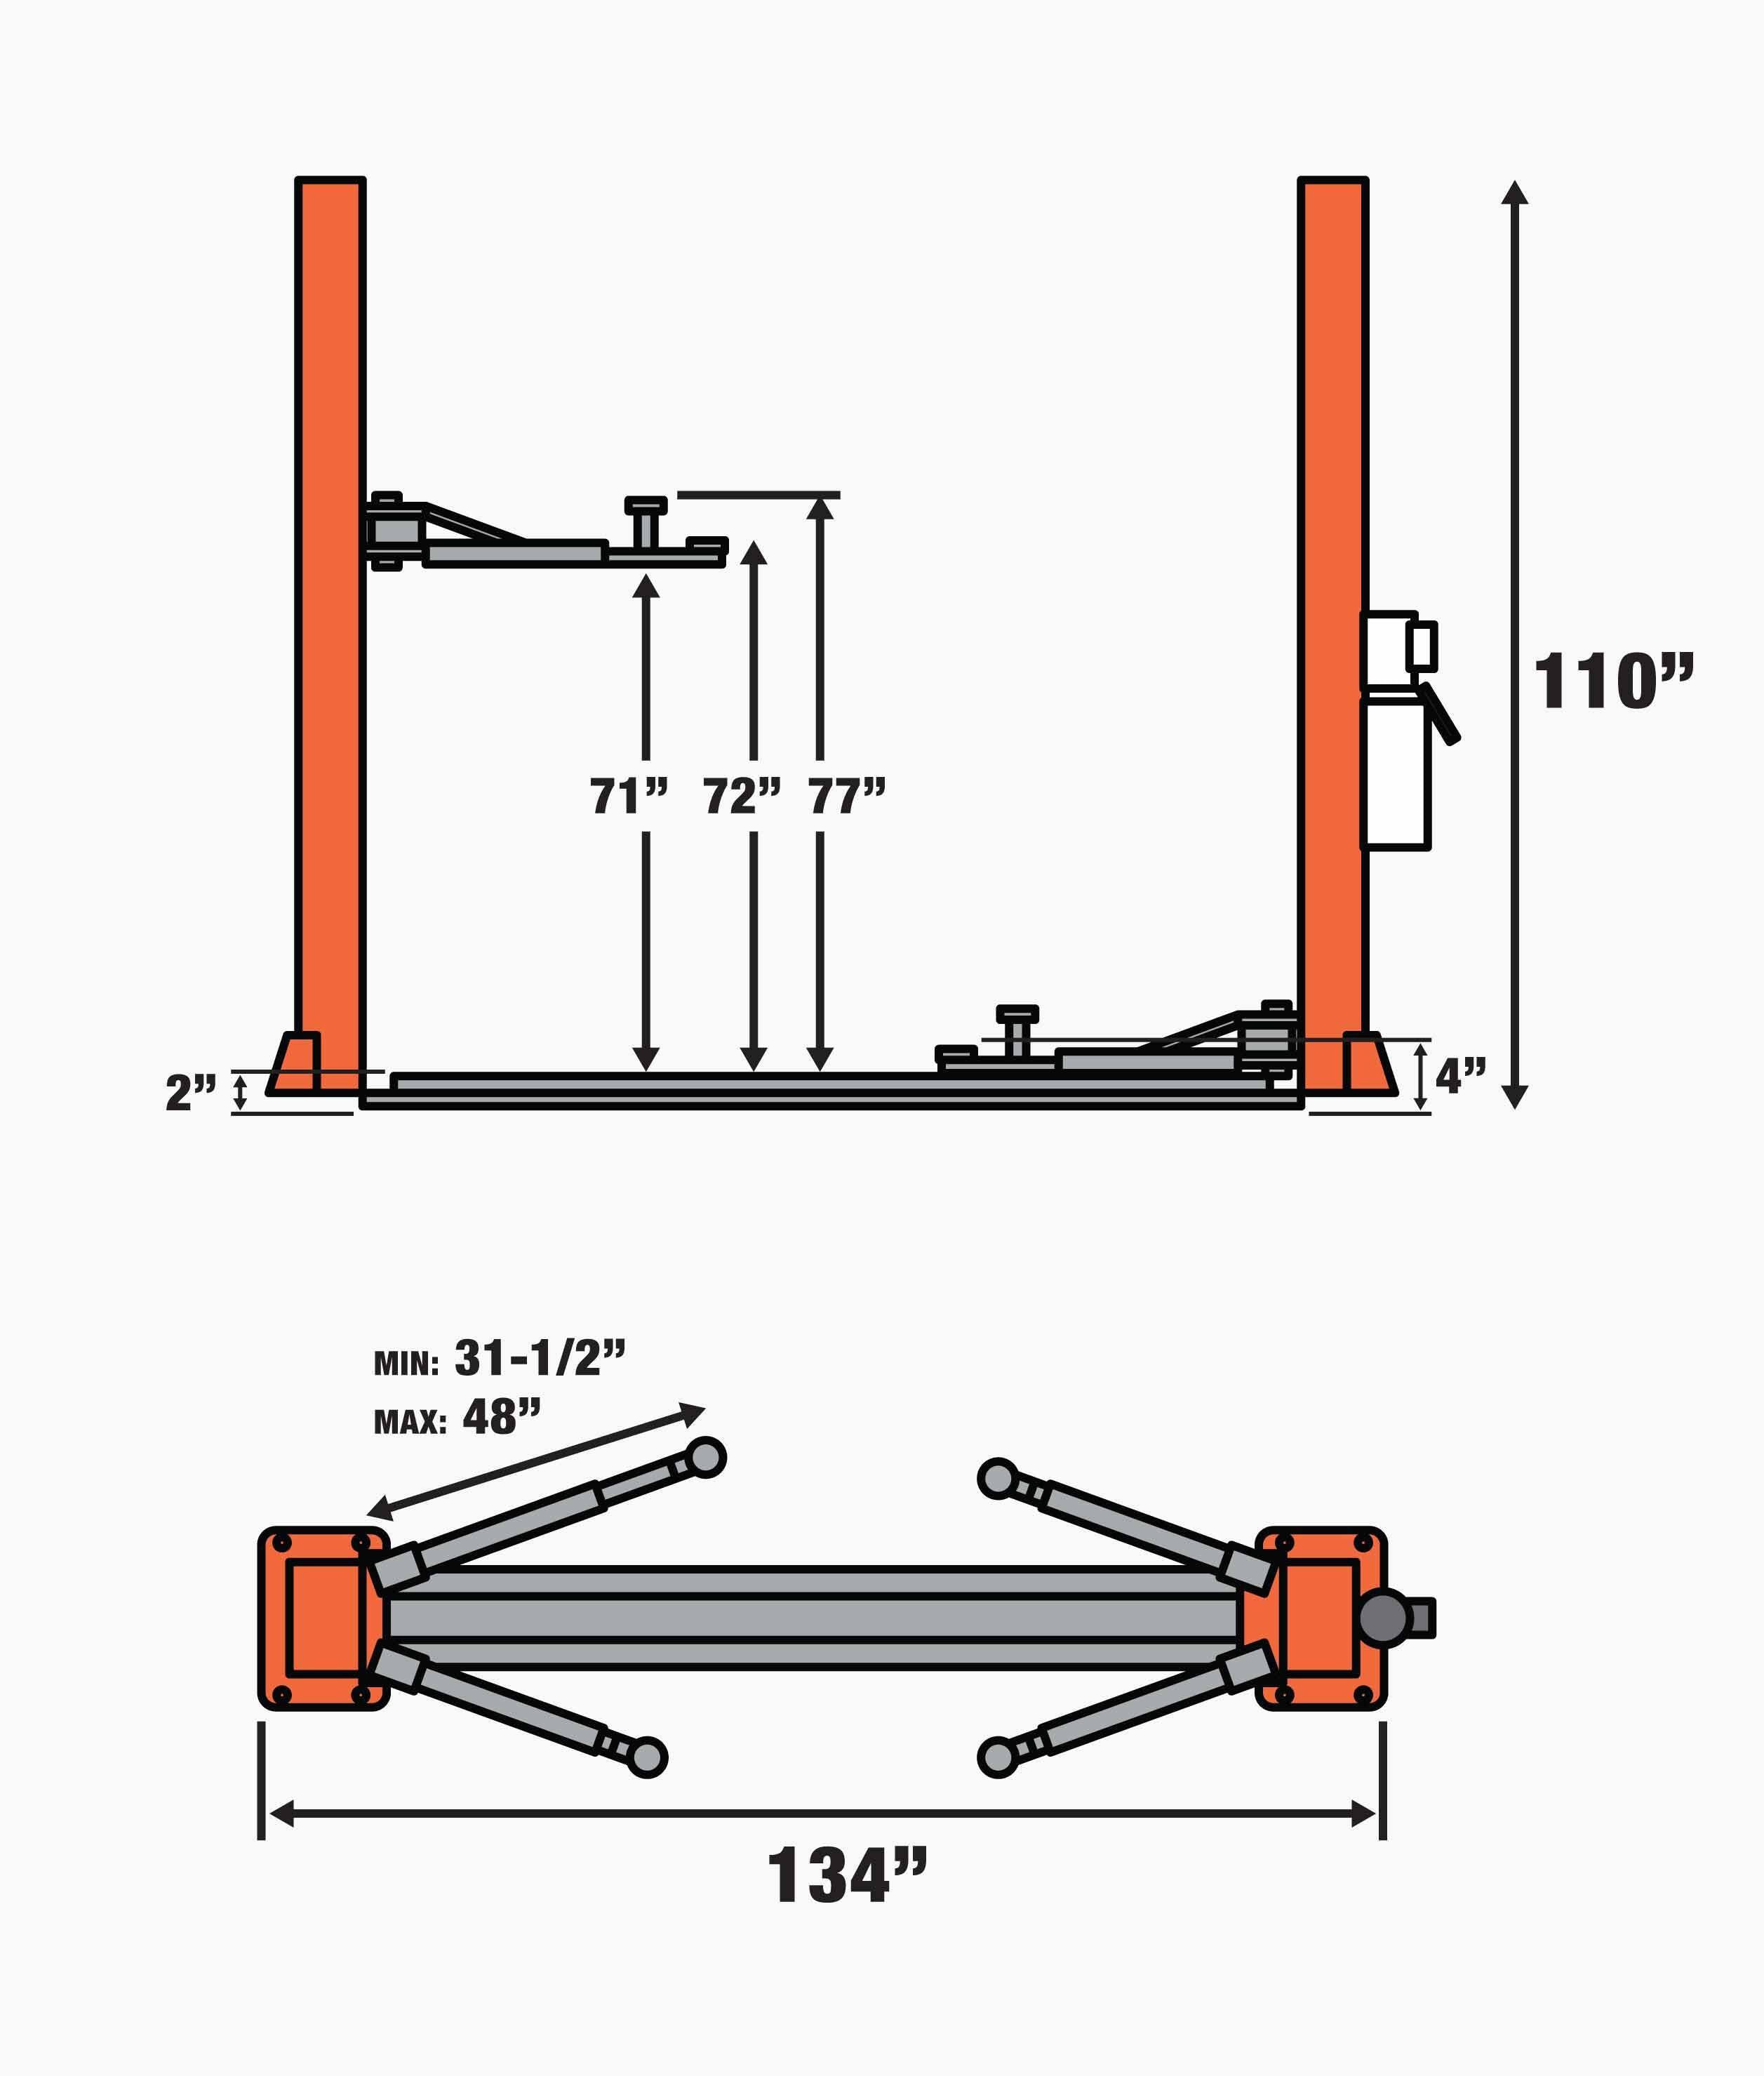 TMG Industrial 10,000-lb Two Post Floor Plate Auto Lift, Symmetric Arms, 77” Lift Height, Dual-Point Lock Release, TMG-TPL45-specifications-image